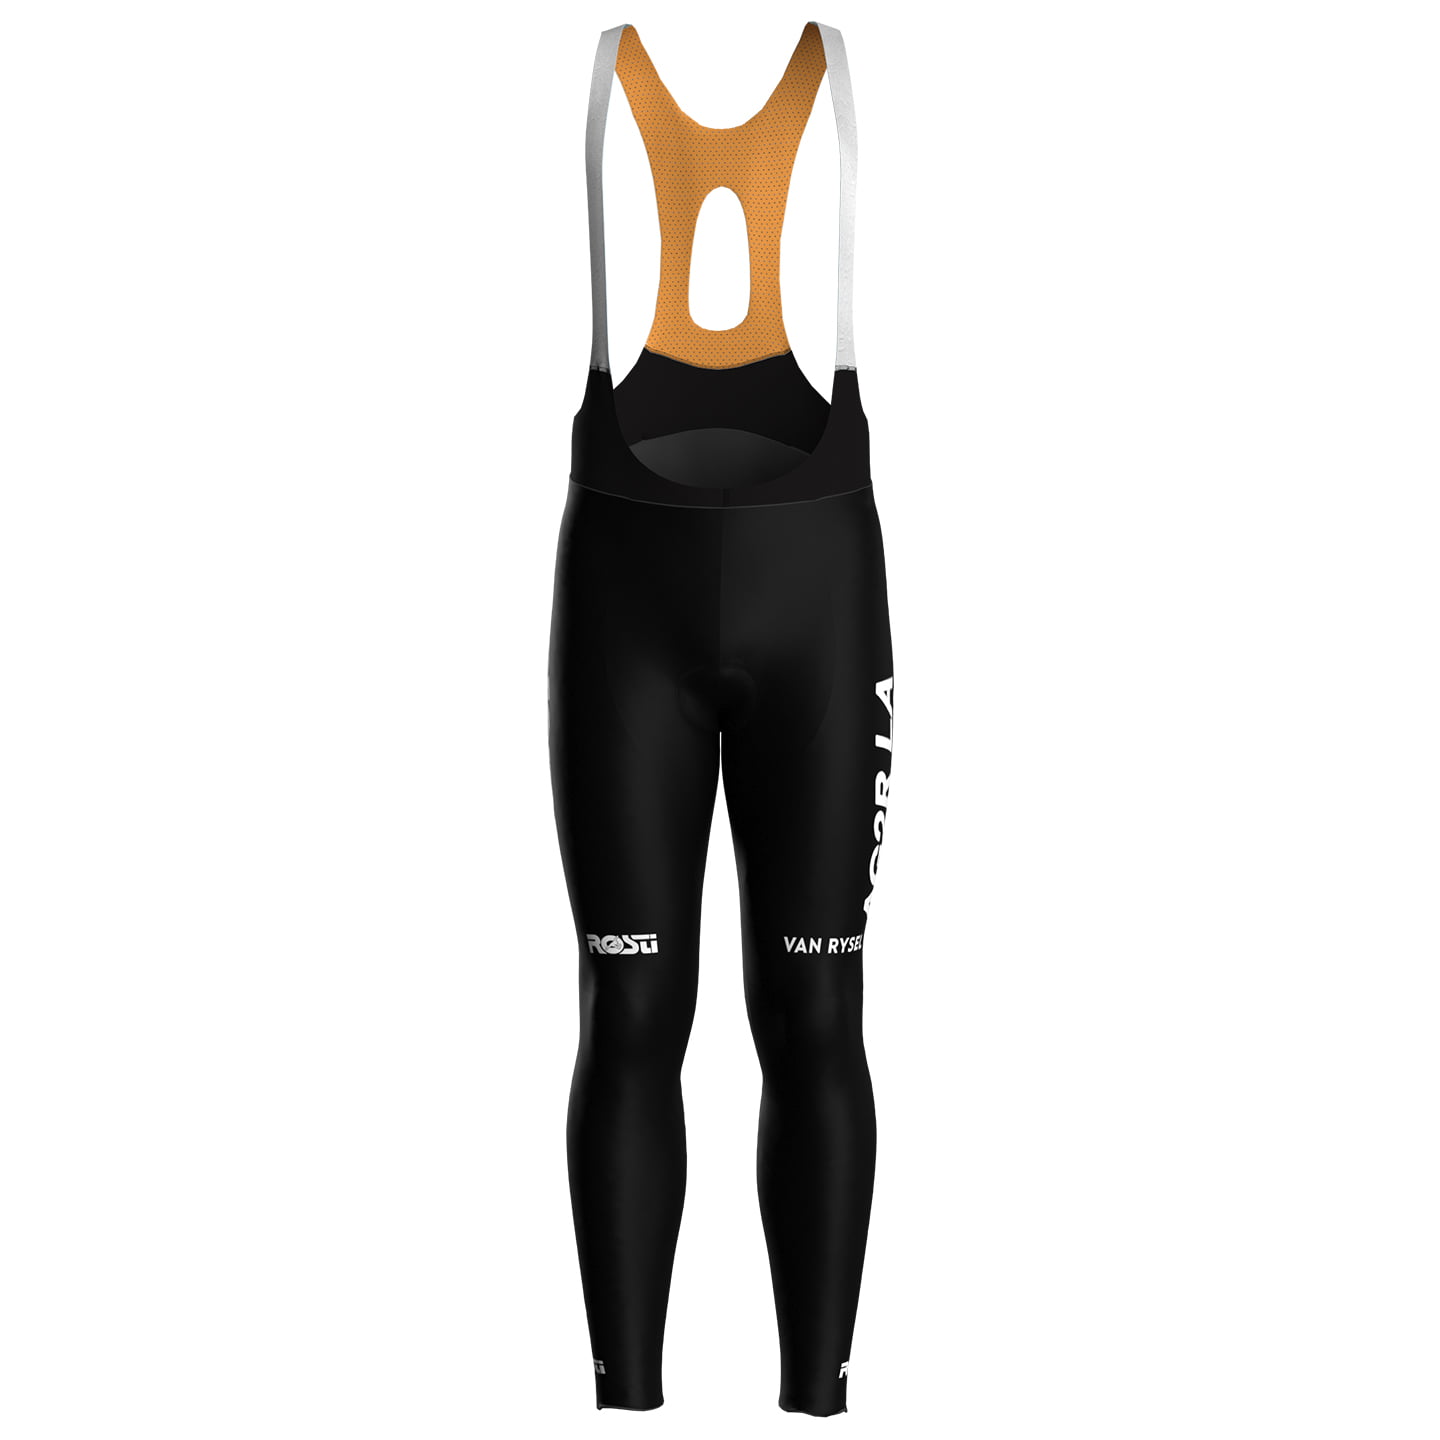 DECATHLON AG2R LA MONDIALE 2024 Bib Tights, for men, size L, Cycle tights, Cycling clothing